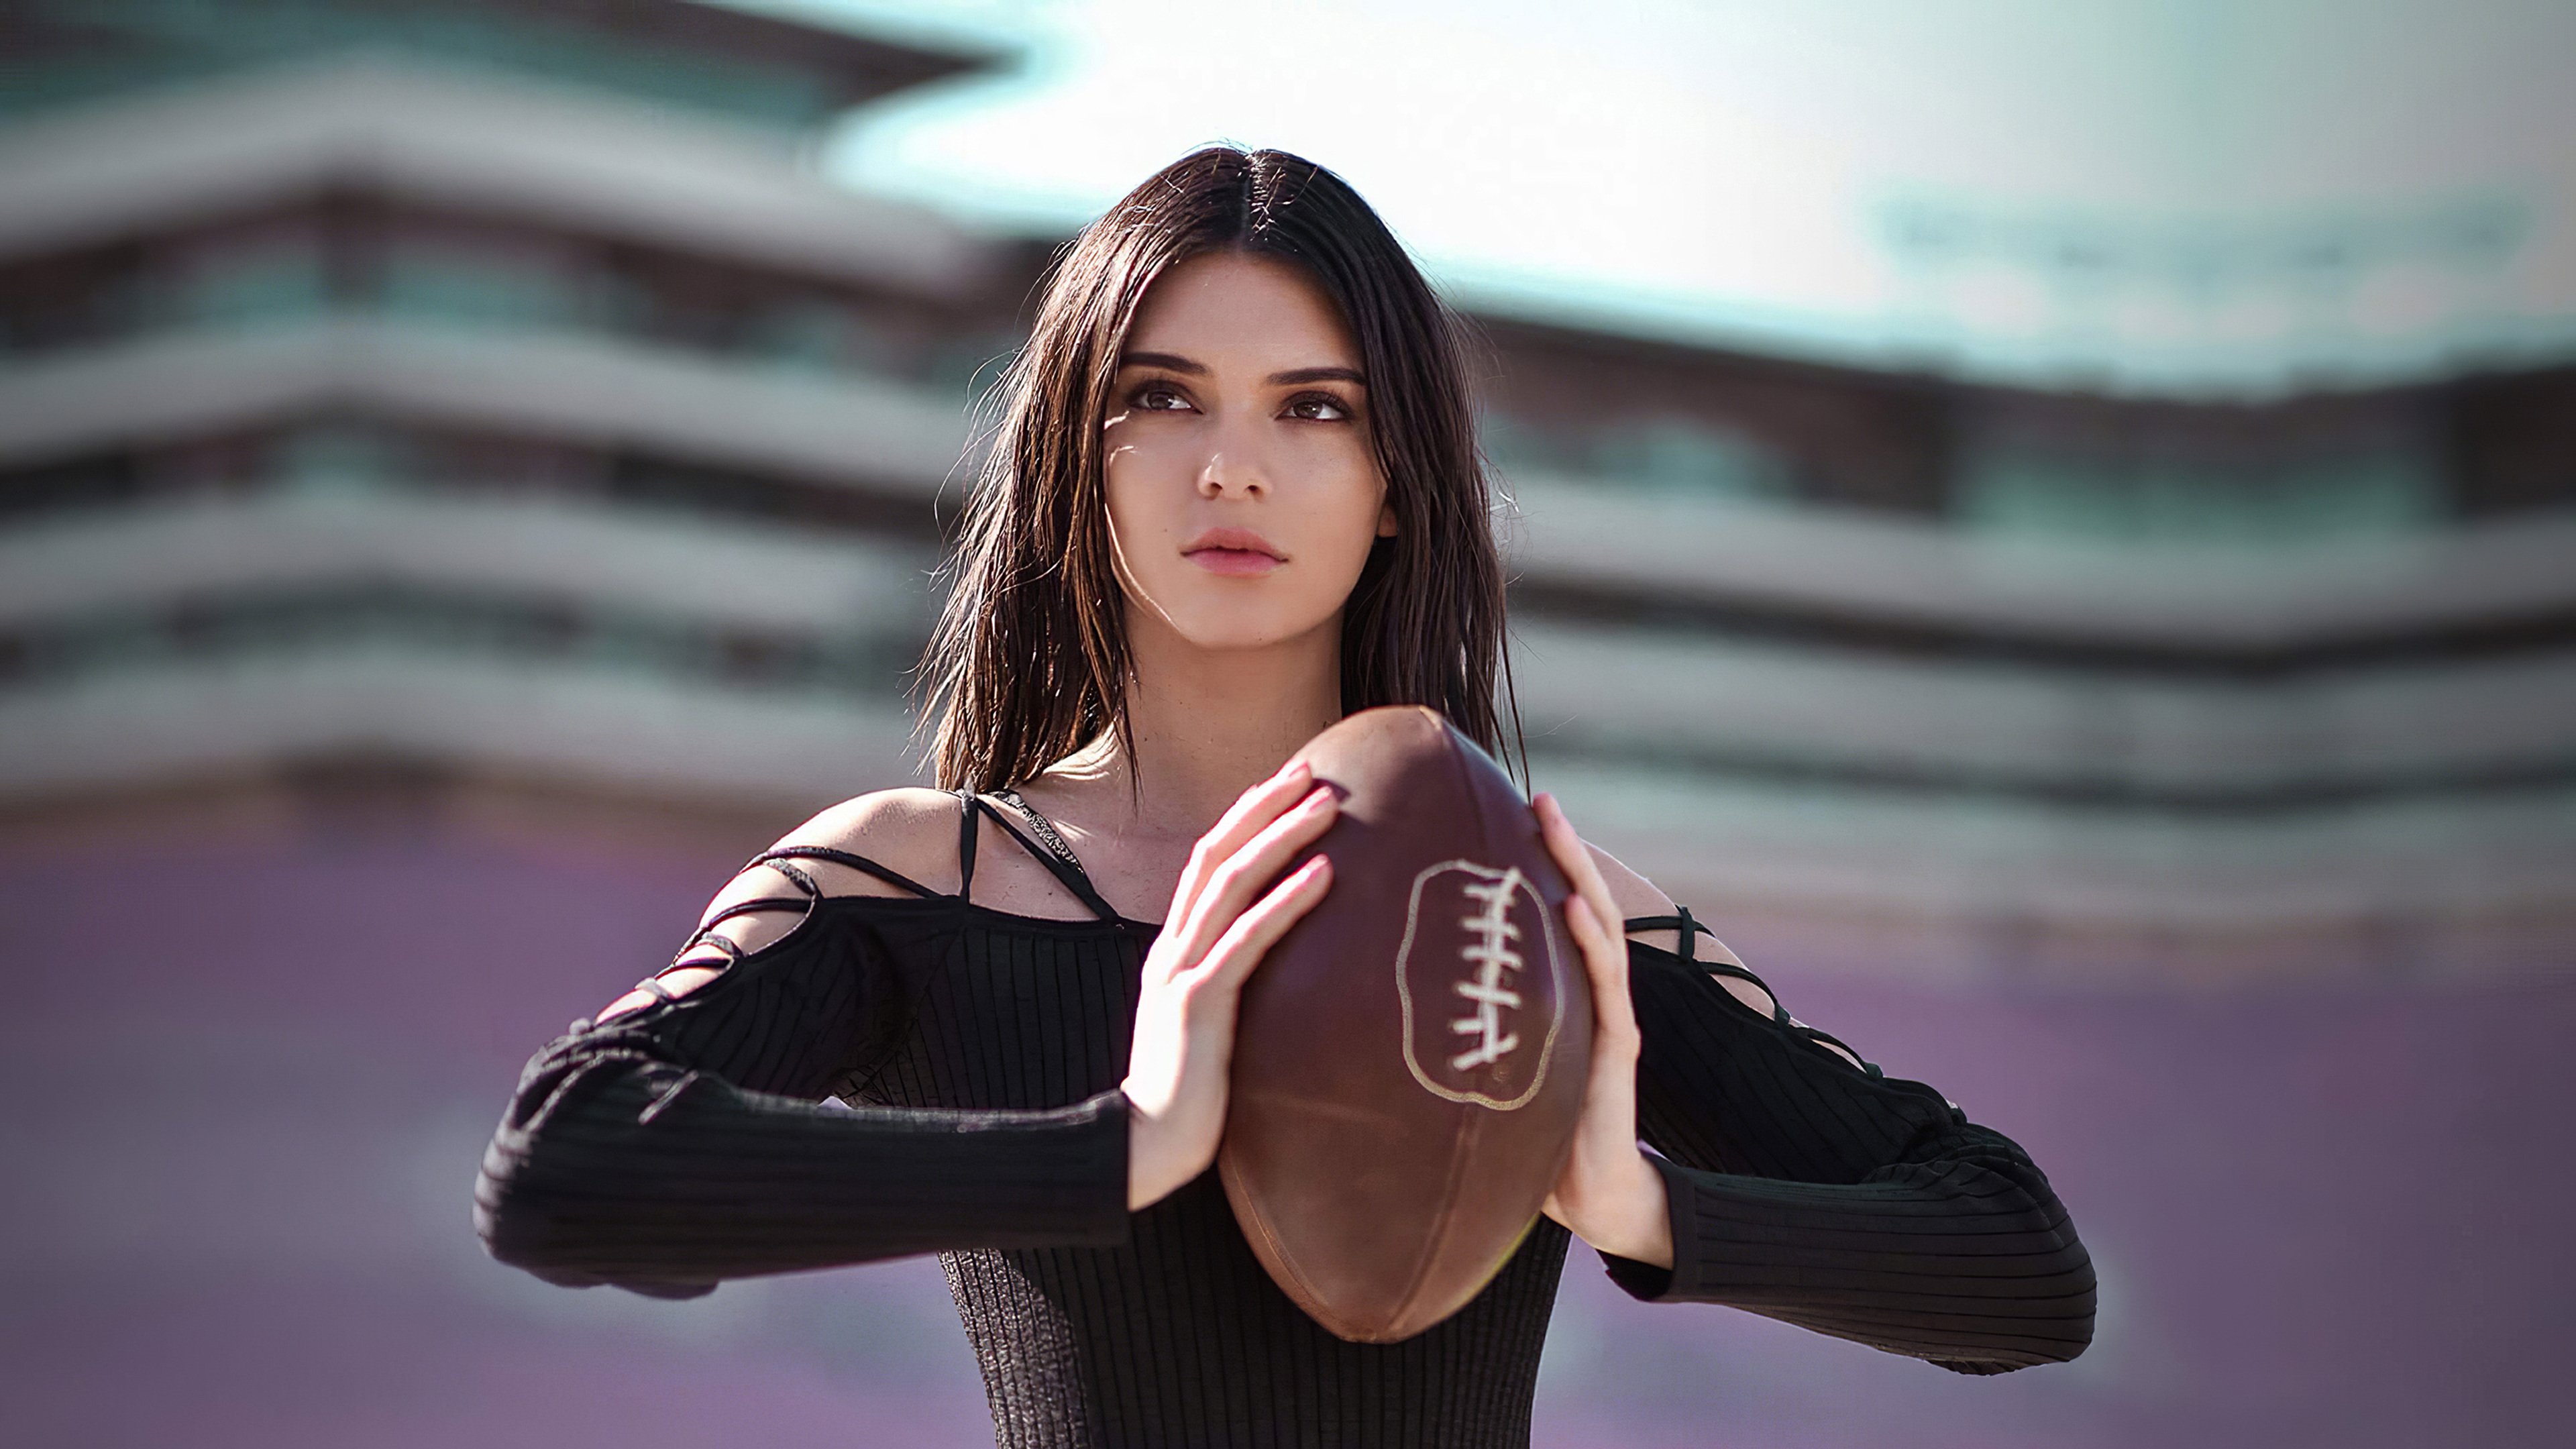 Wallpaper Kendall Jenner With football ball